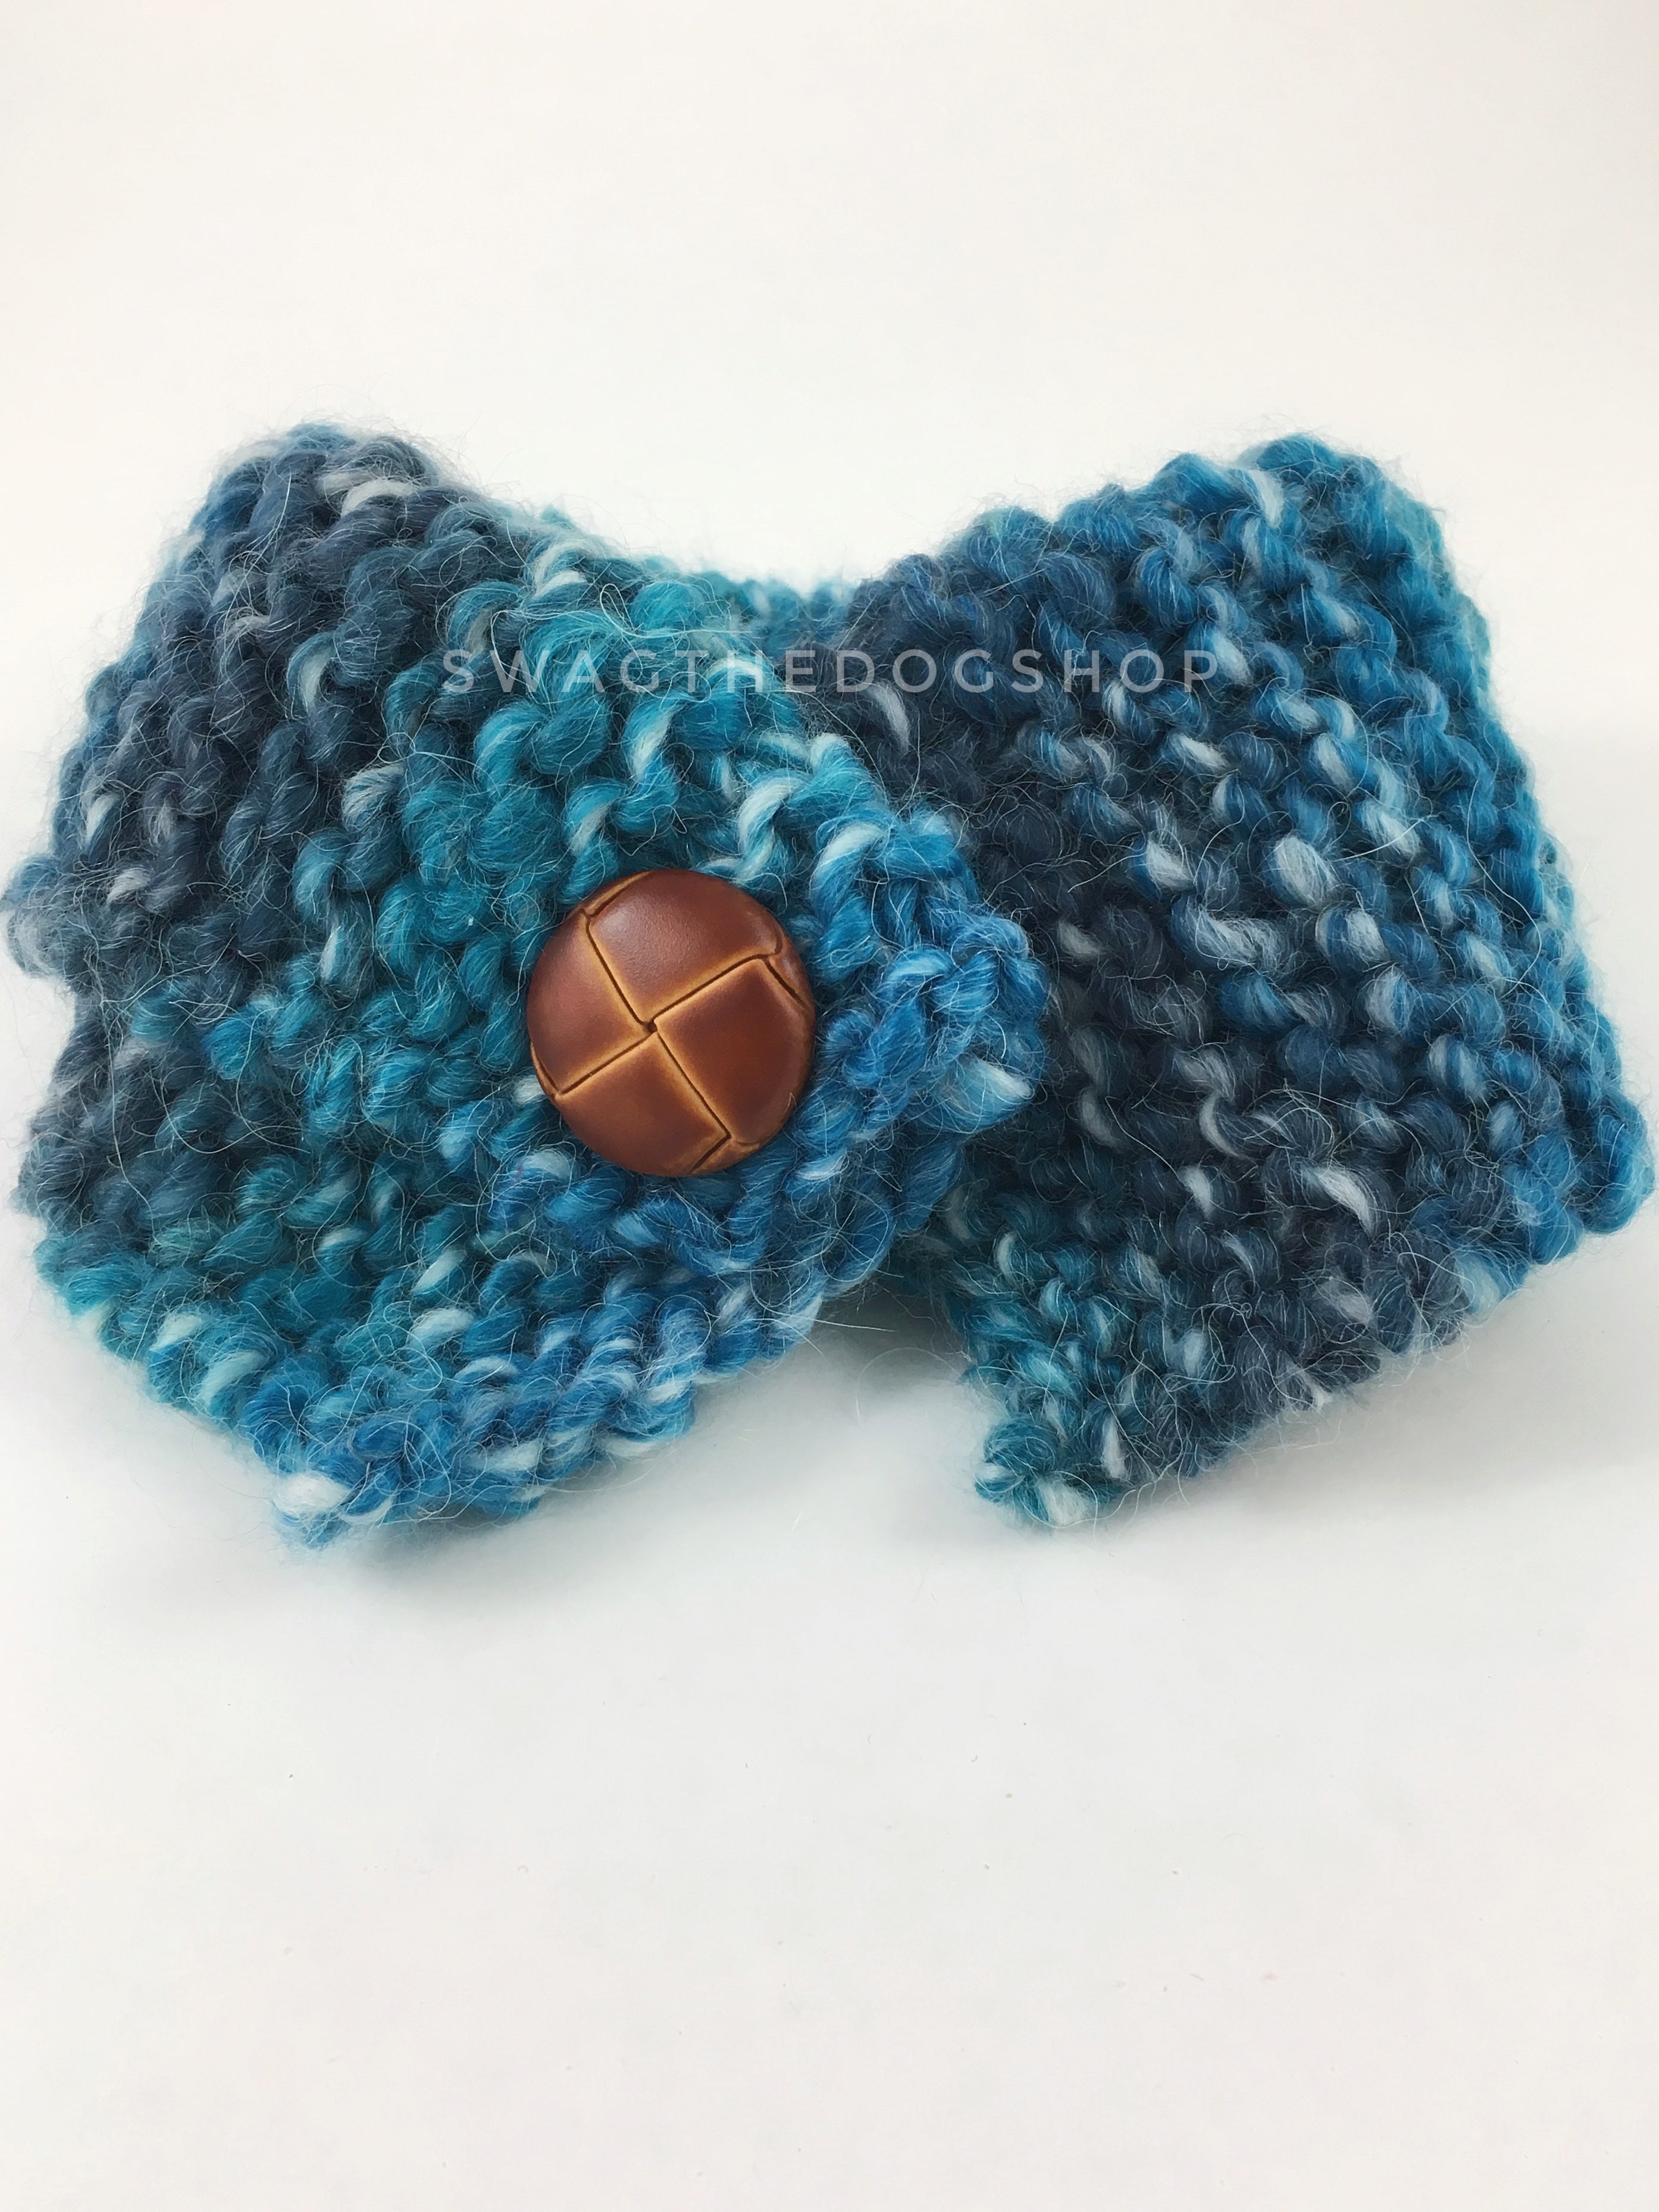 Blue Lagoon Swagsnood - Product Front View. Spectrum of Blue Color Dog Snood with Accent Button